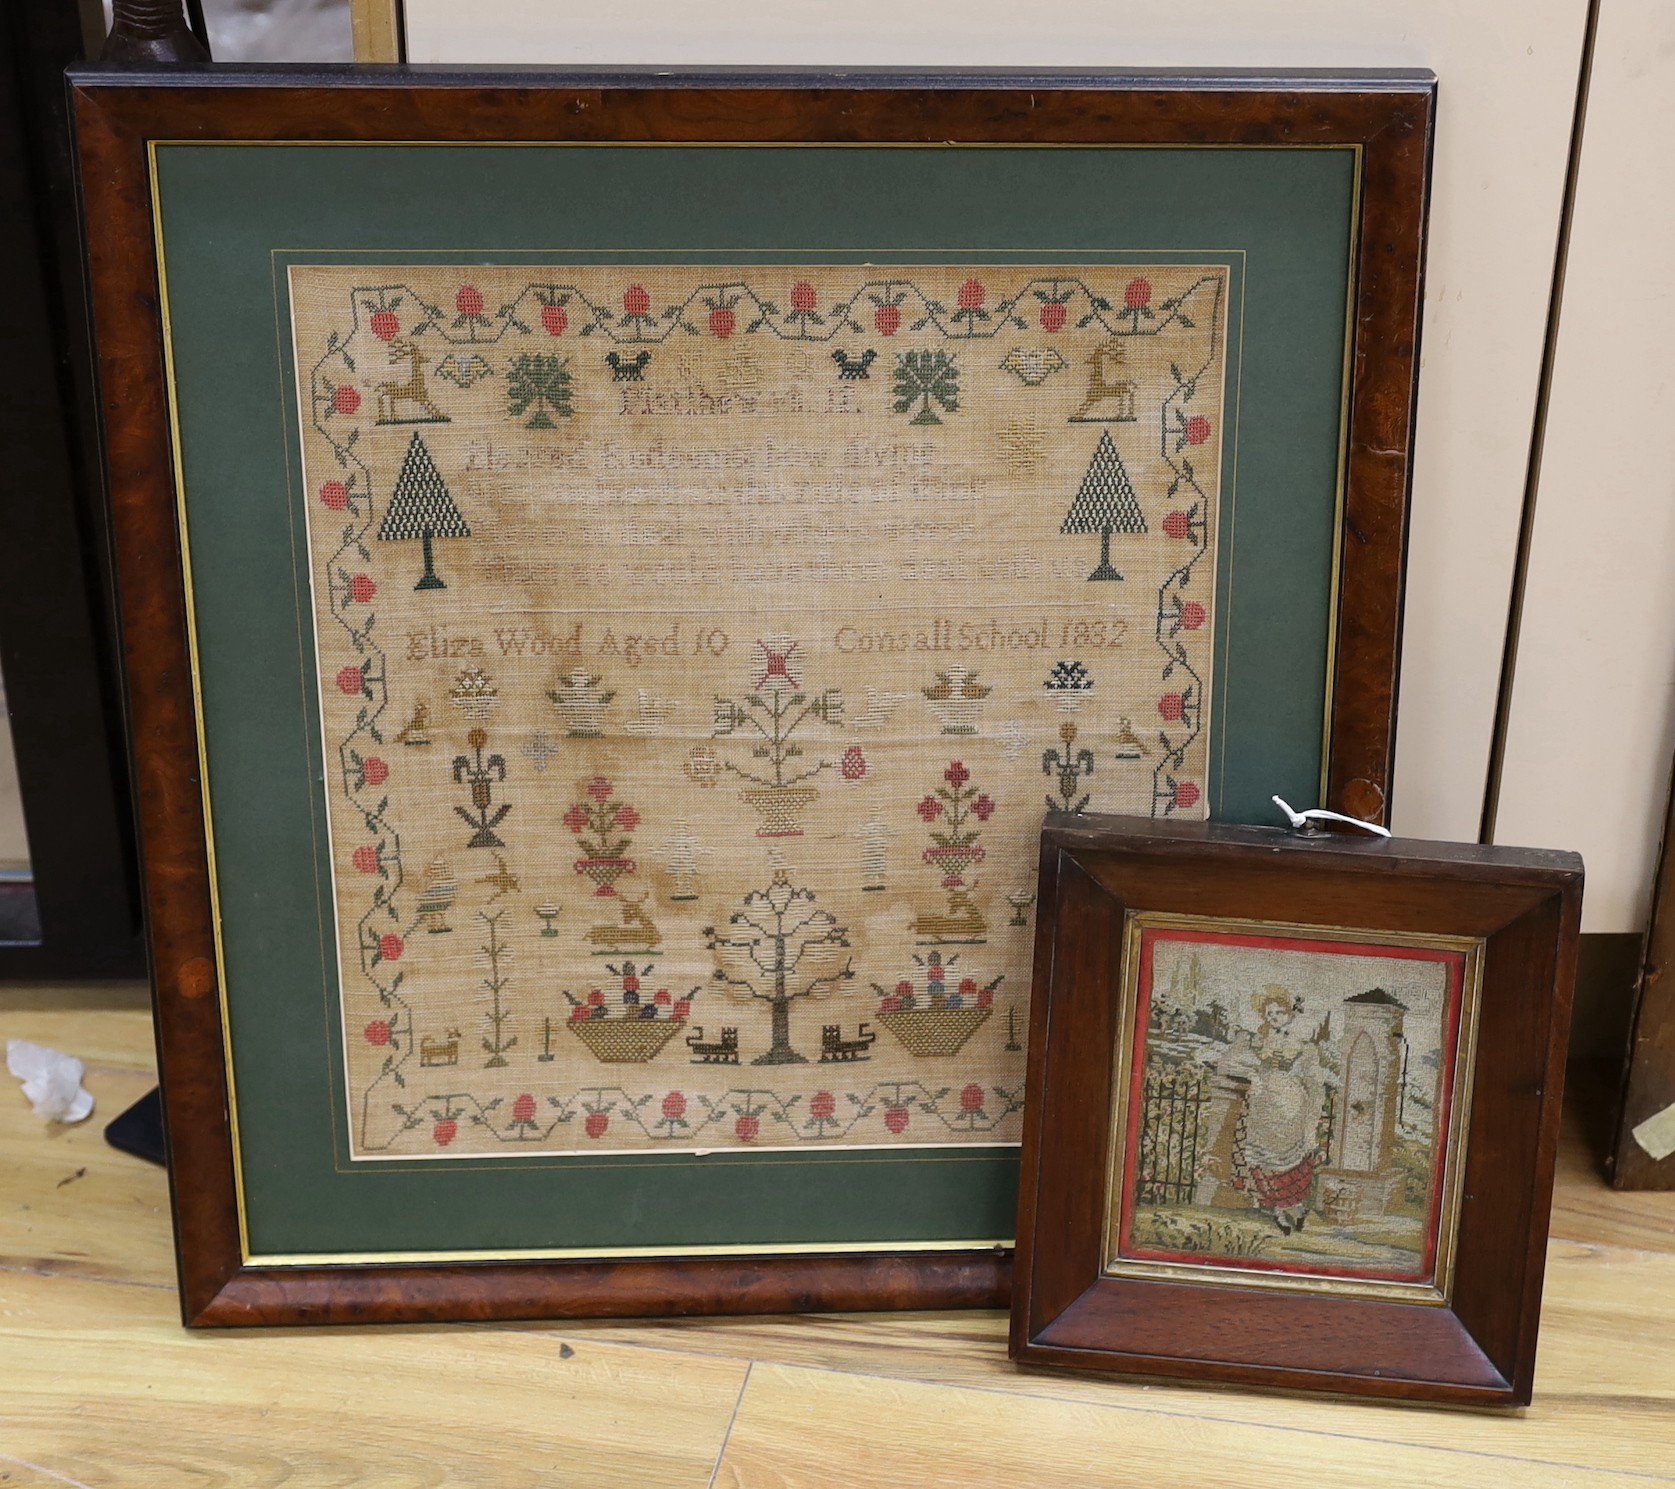 A late 19th century sample by Eliza Wood, aged 10, dated 1882, 43 x 40cm, together with a smaller glazed frame needlework panel of a lady leaning                                                                           